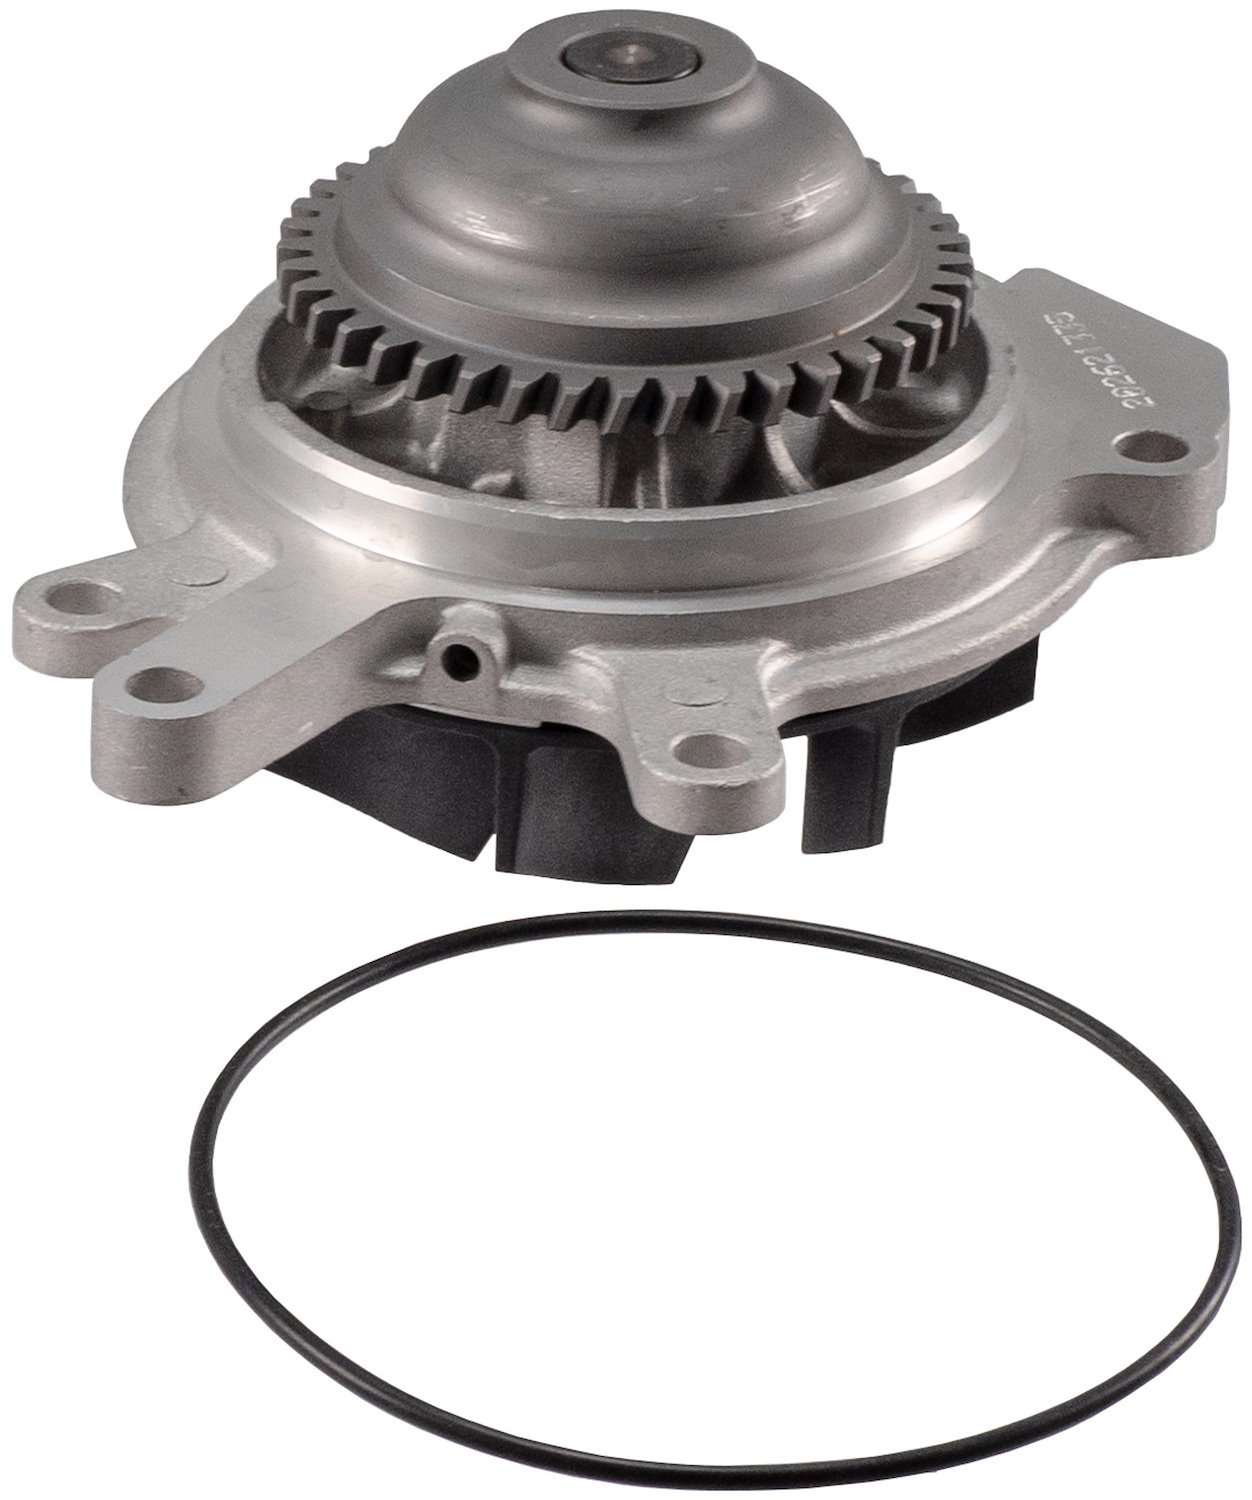 Water Pump Fits Select 2006-2016 GM 6.6L Duramax Engines